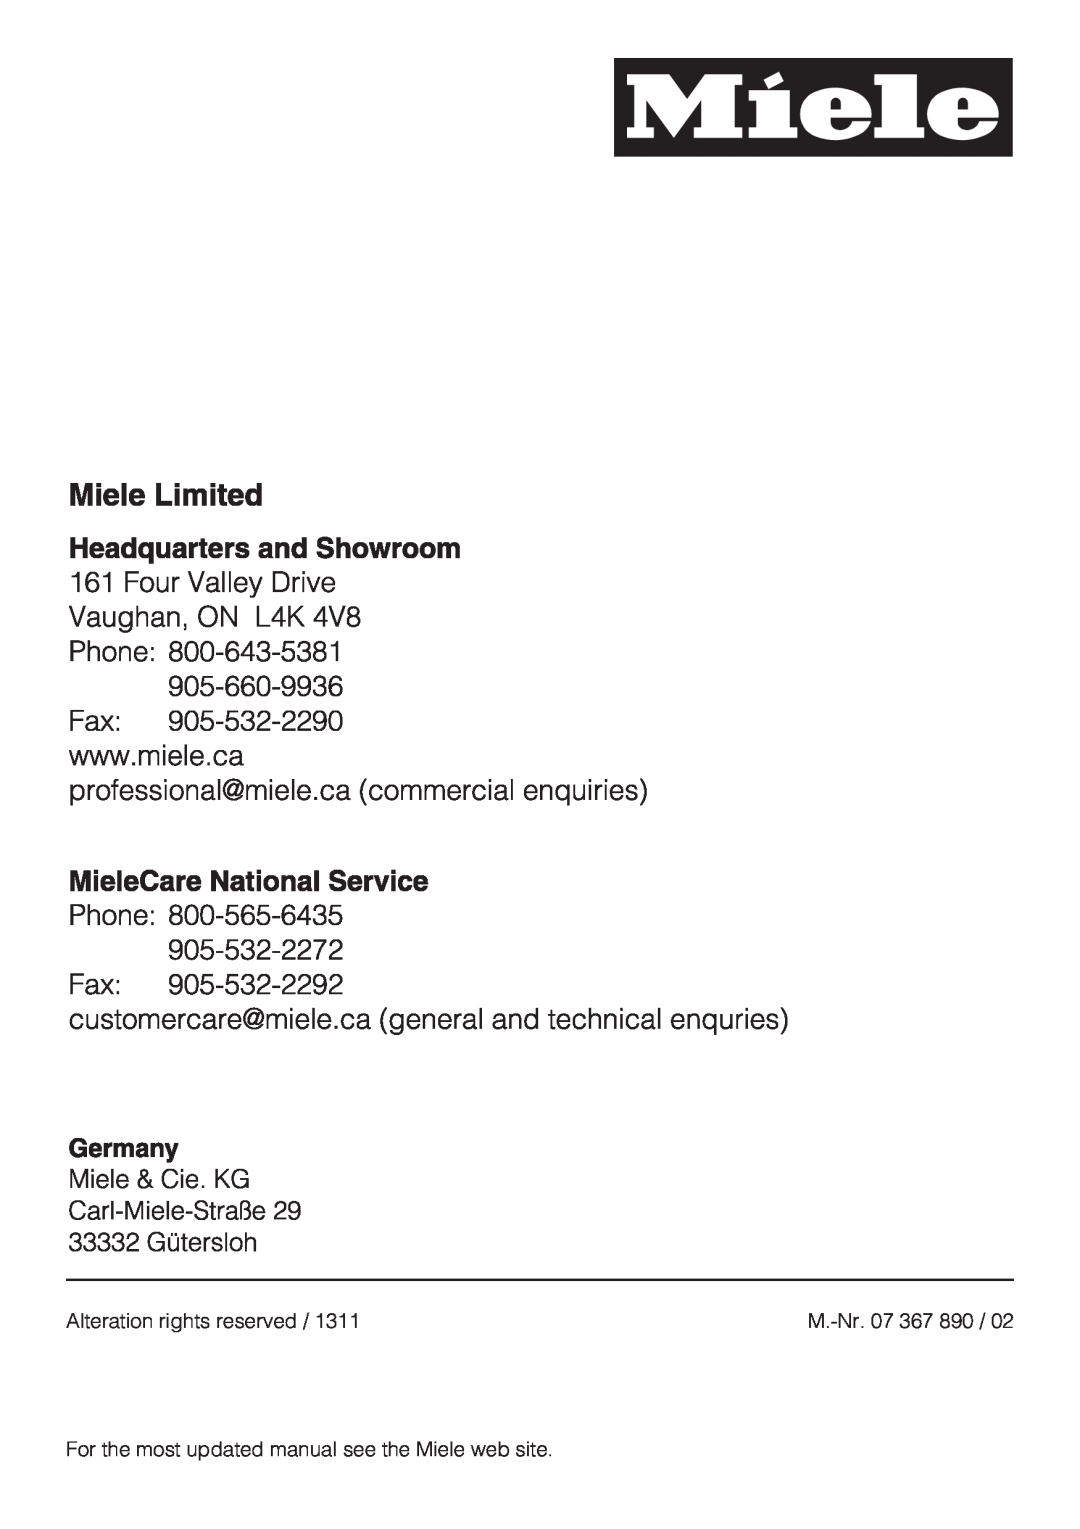 Miele KM 5993, KM 5987 installation instructions Alteration rights reserved, M.-Nr.07 